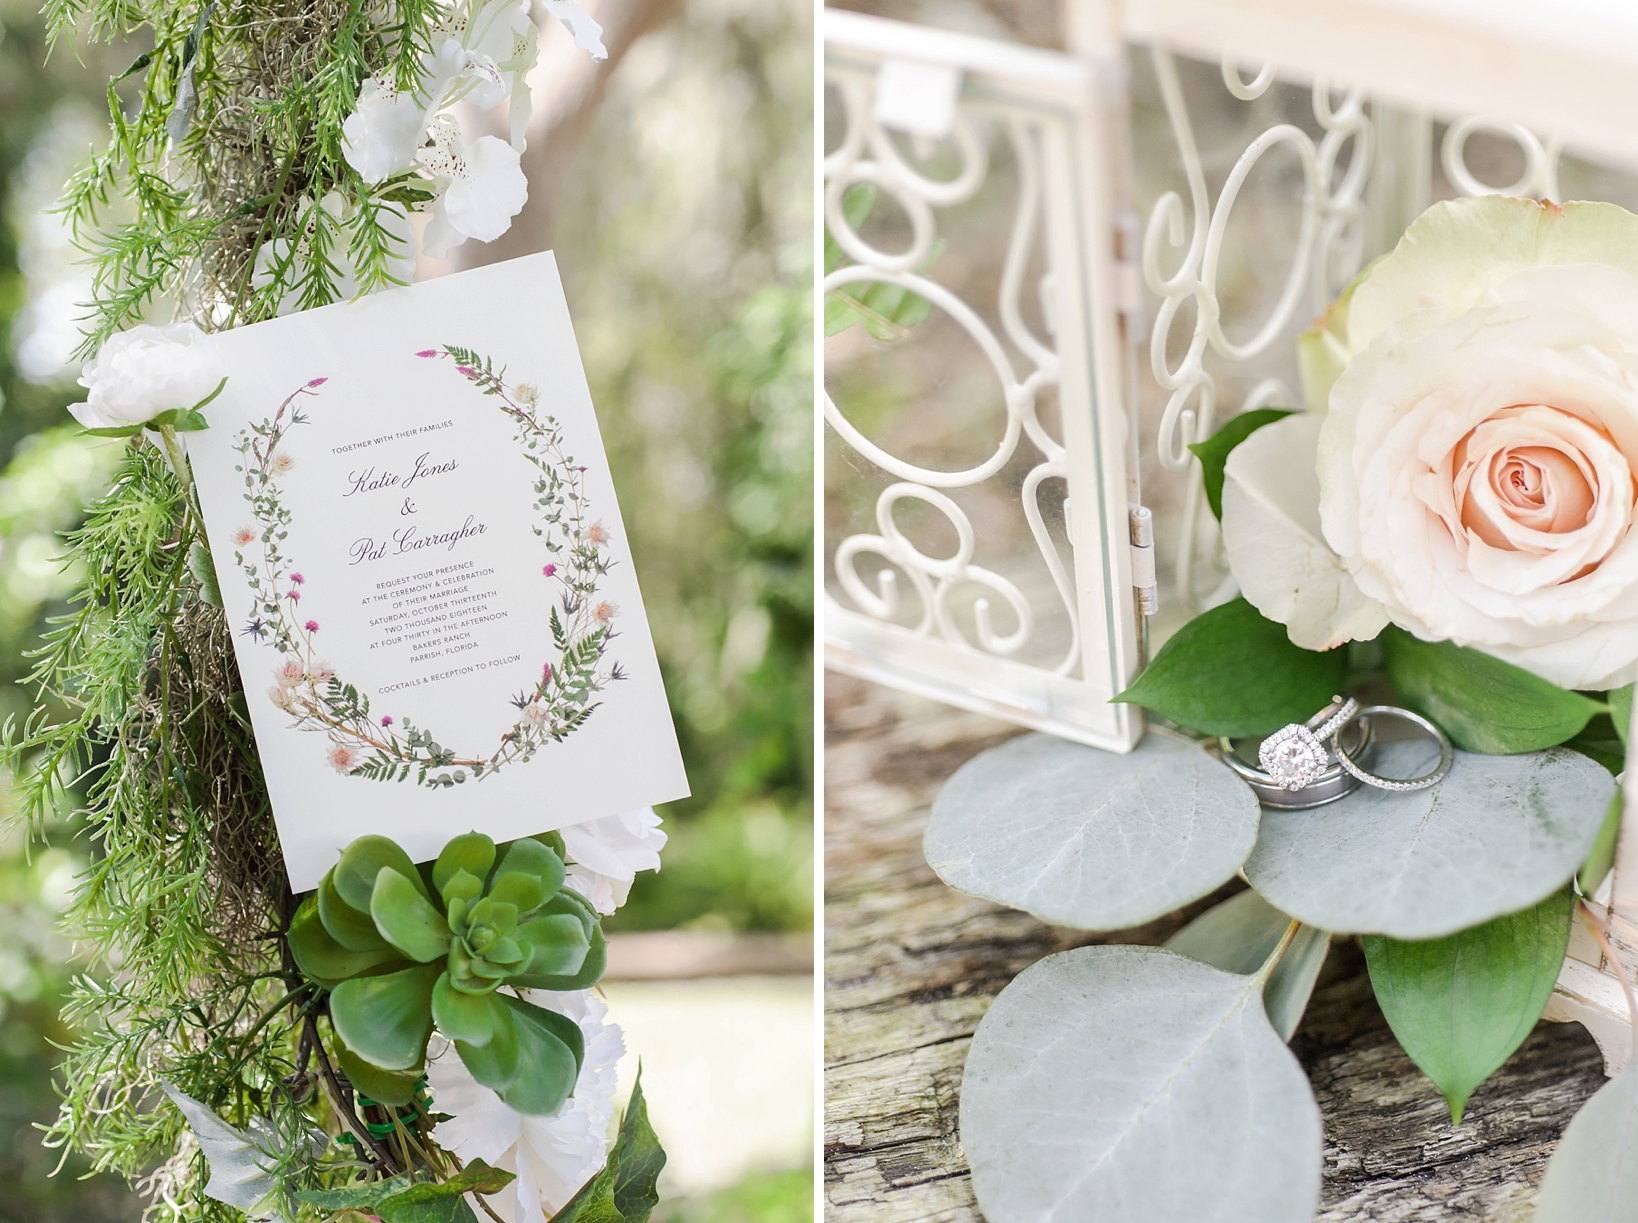 Wedding invitation in succulent filled wedding arch florals and wedding rings inside lantern by Sarah & Ben Photography